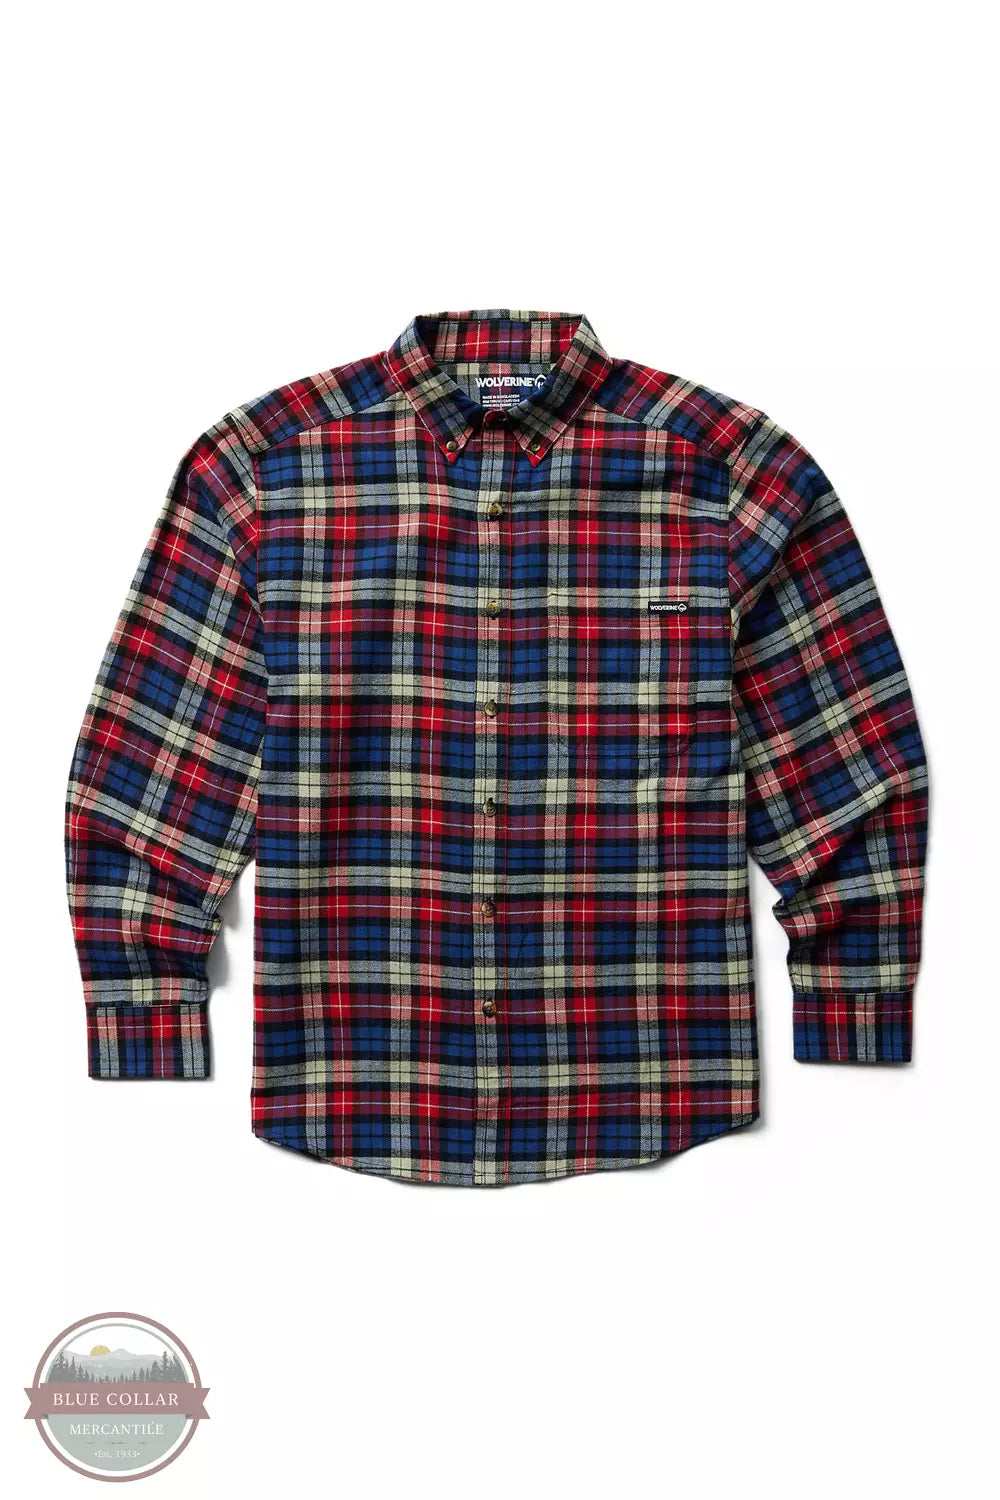 Wolverine W1211540 Hastings Flannel Shirt Royal Front View